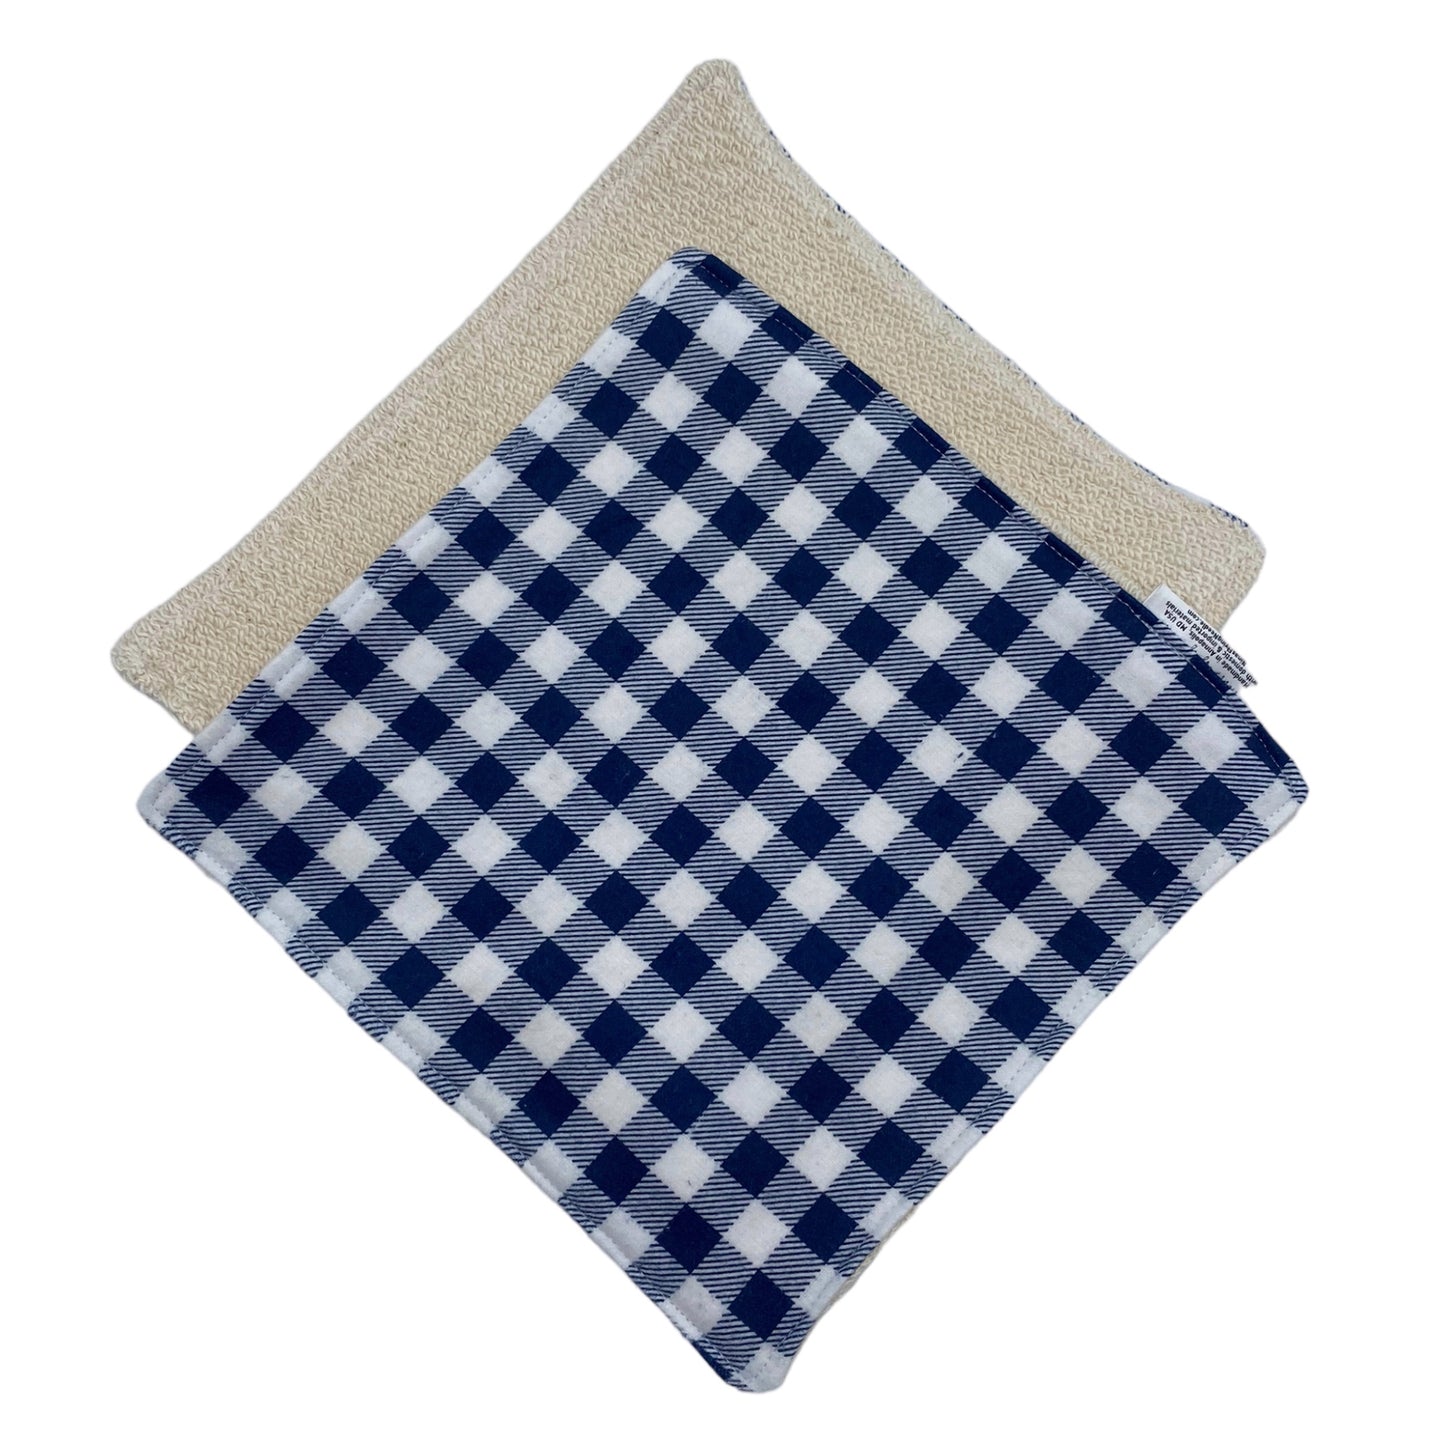 Wash Cloth - Regular - Gingham - Blue and White